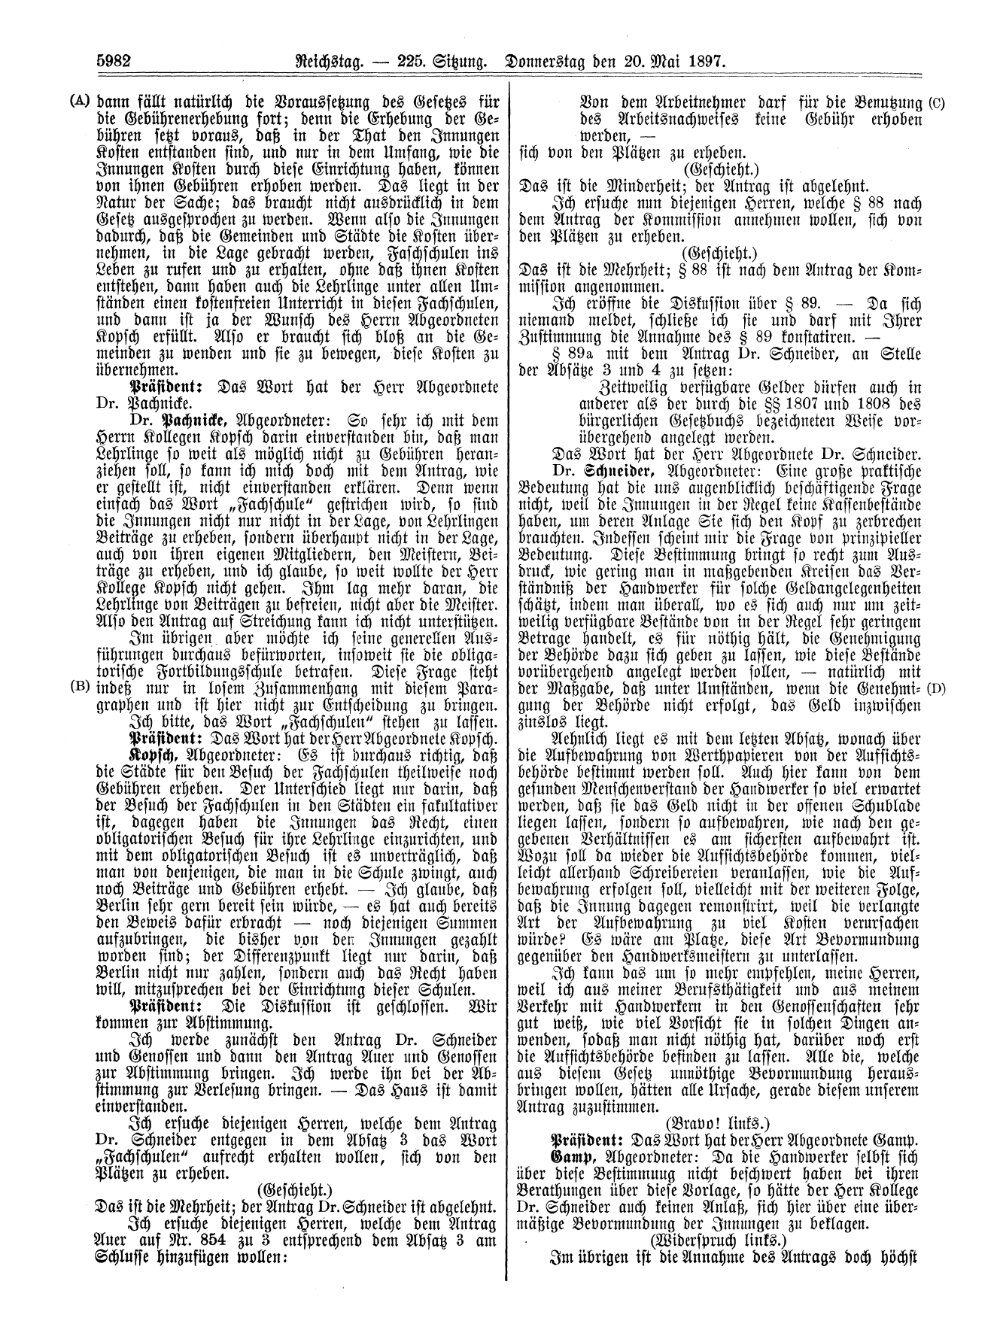 Scan of page 5982